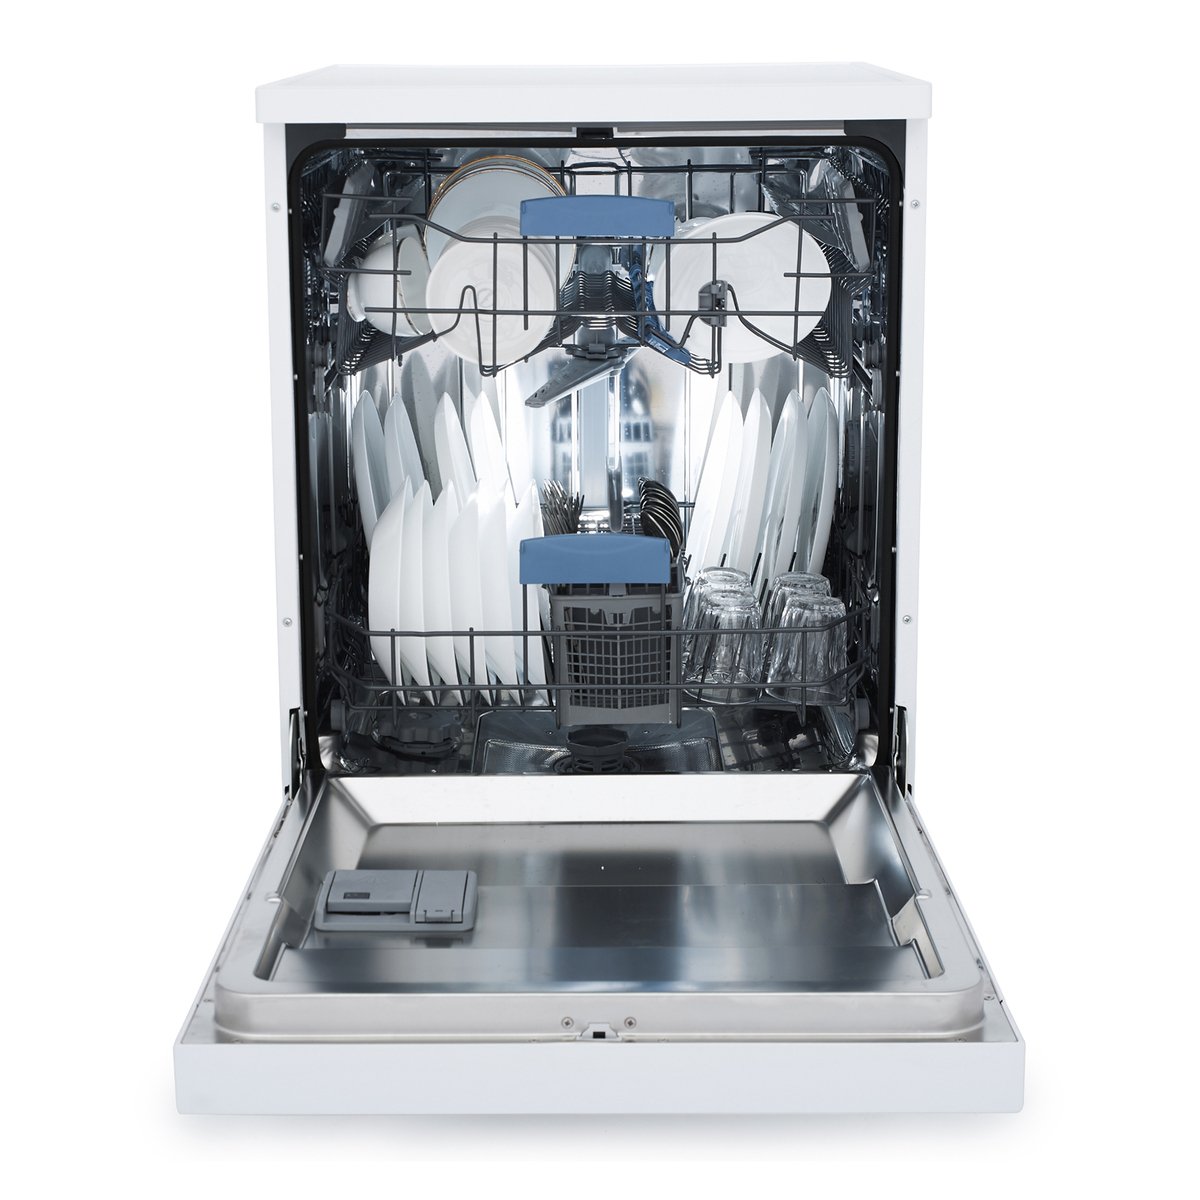 Hoover Dishwasher HDW-V512-W 12 Place Settings 5 Programs